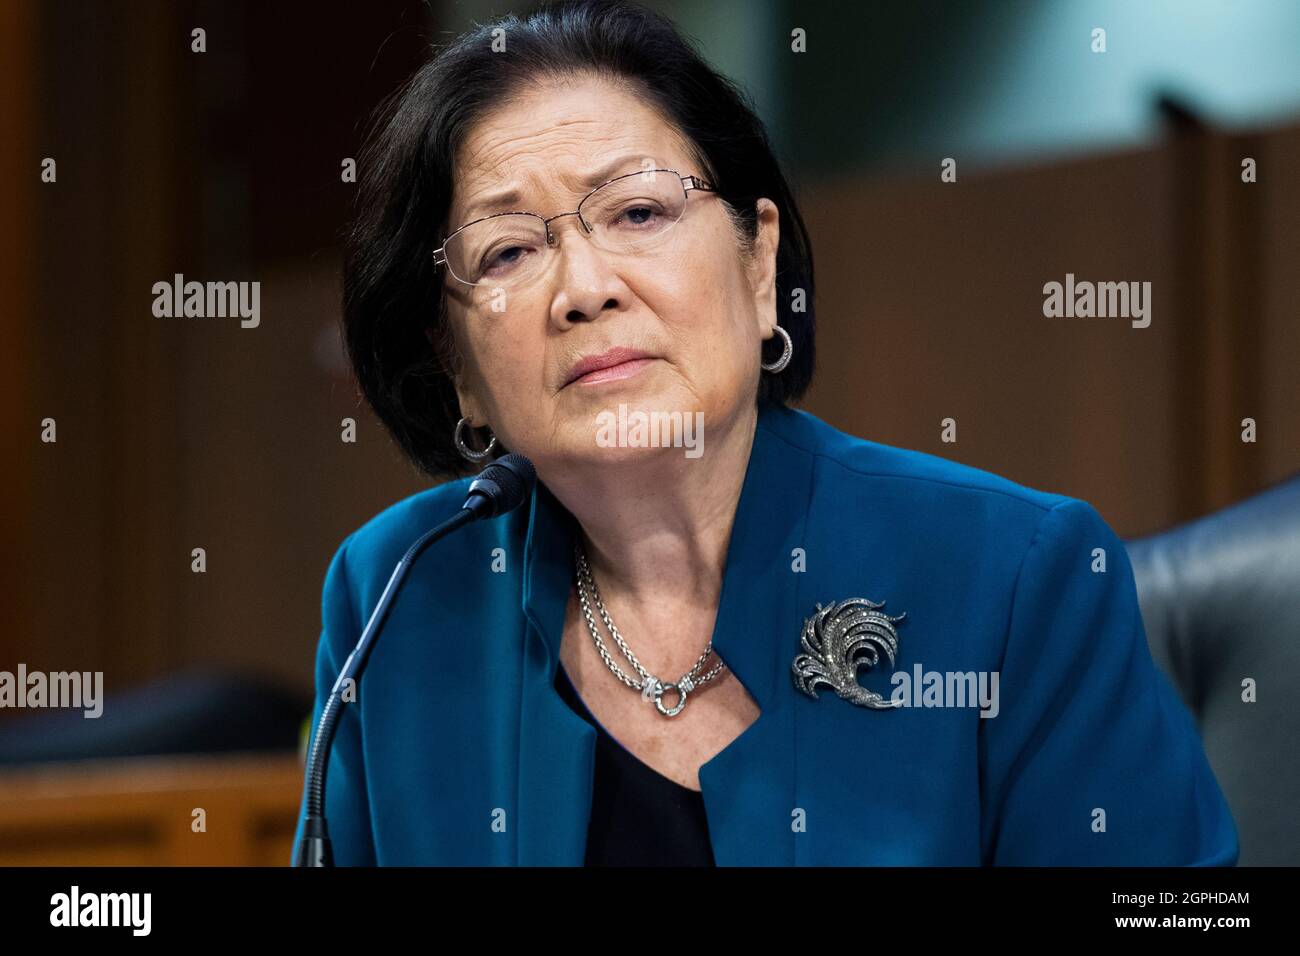 Washington, United States Of America. 29th Sep, 2021. United States Senator Mazie Hirono (Democrat of Hawaii) attends the Senate Judiciary Committee hearing titled “Texas's Unconstitutional Abortion Ban and the Role of the Shadow Docket,” in Hart Senate Office Building in Washington, DC, on Wednesday, September 29, 2021.Credit: Tom Williams/Pool via CNP Photo via Credit: Newscom/Alamy Live News Stock Photo